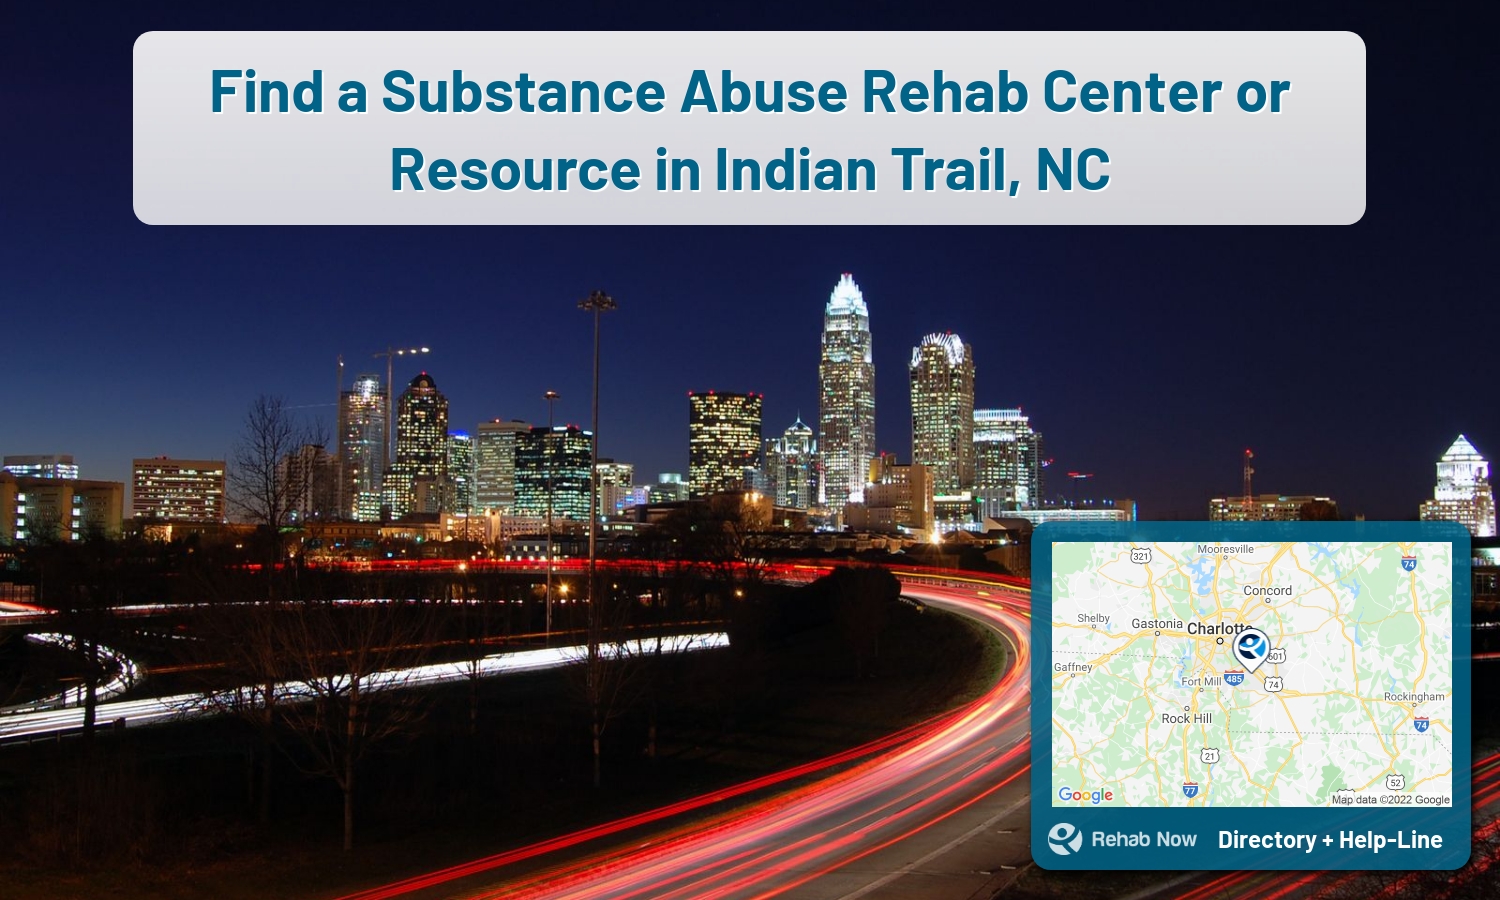 Find drug rehab and alcohol treatment services in Indian Trail. Our experts help you find a center in Indian Trail, North Carolina